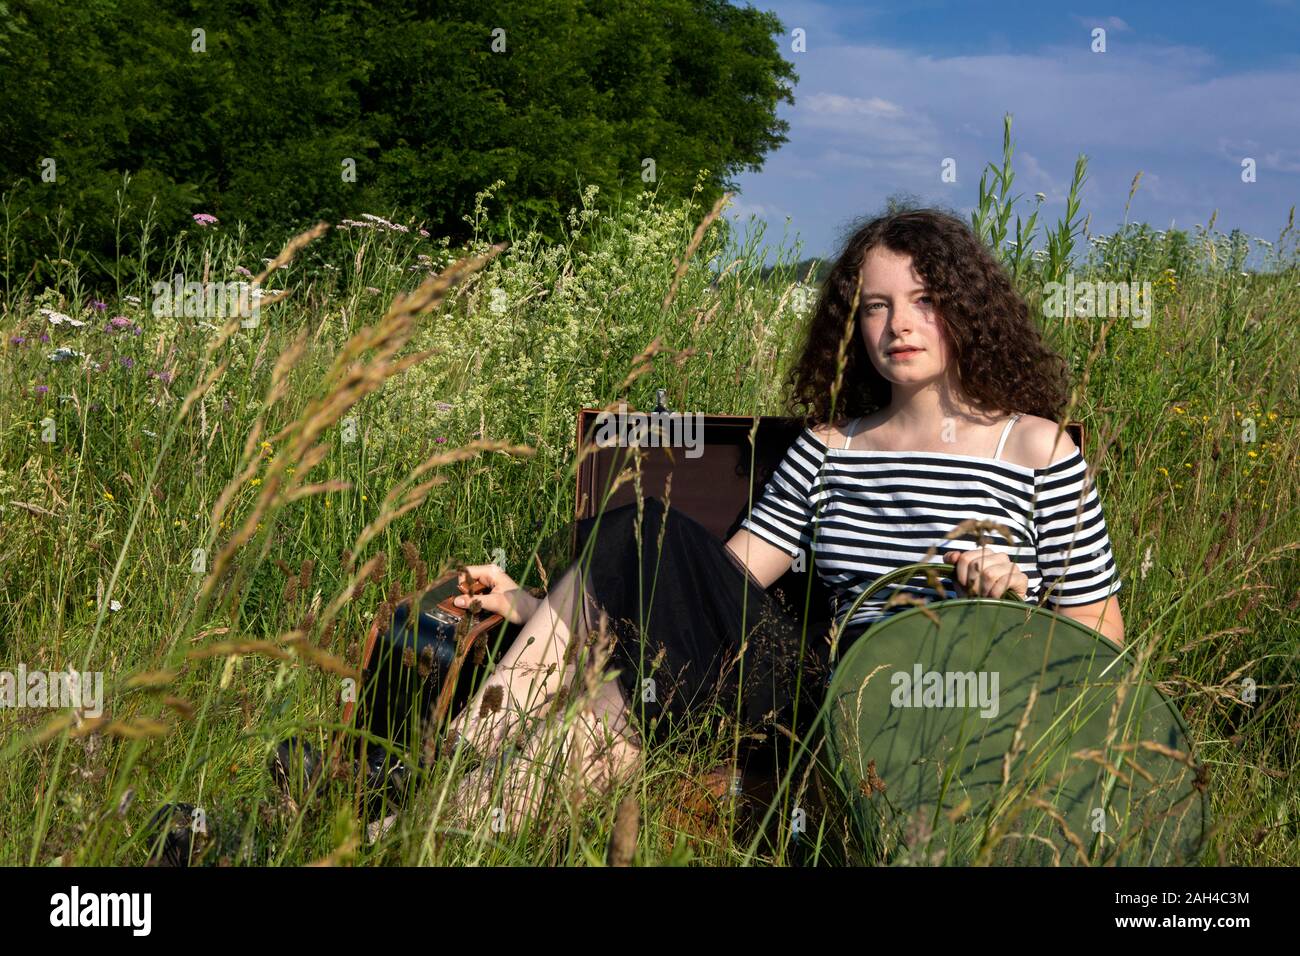 Portrait of young woman sitting in suitcase on a meadow Banque D'Images